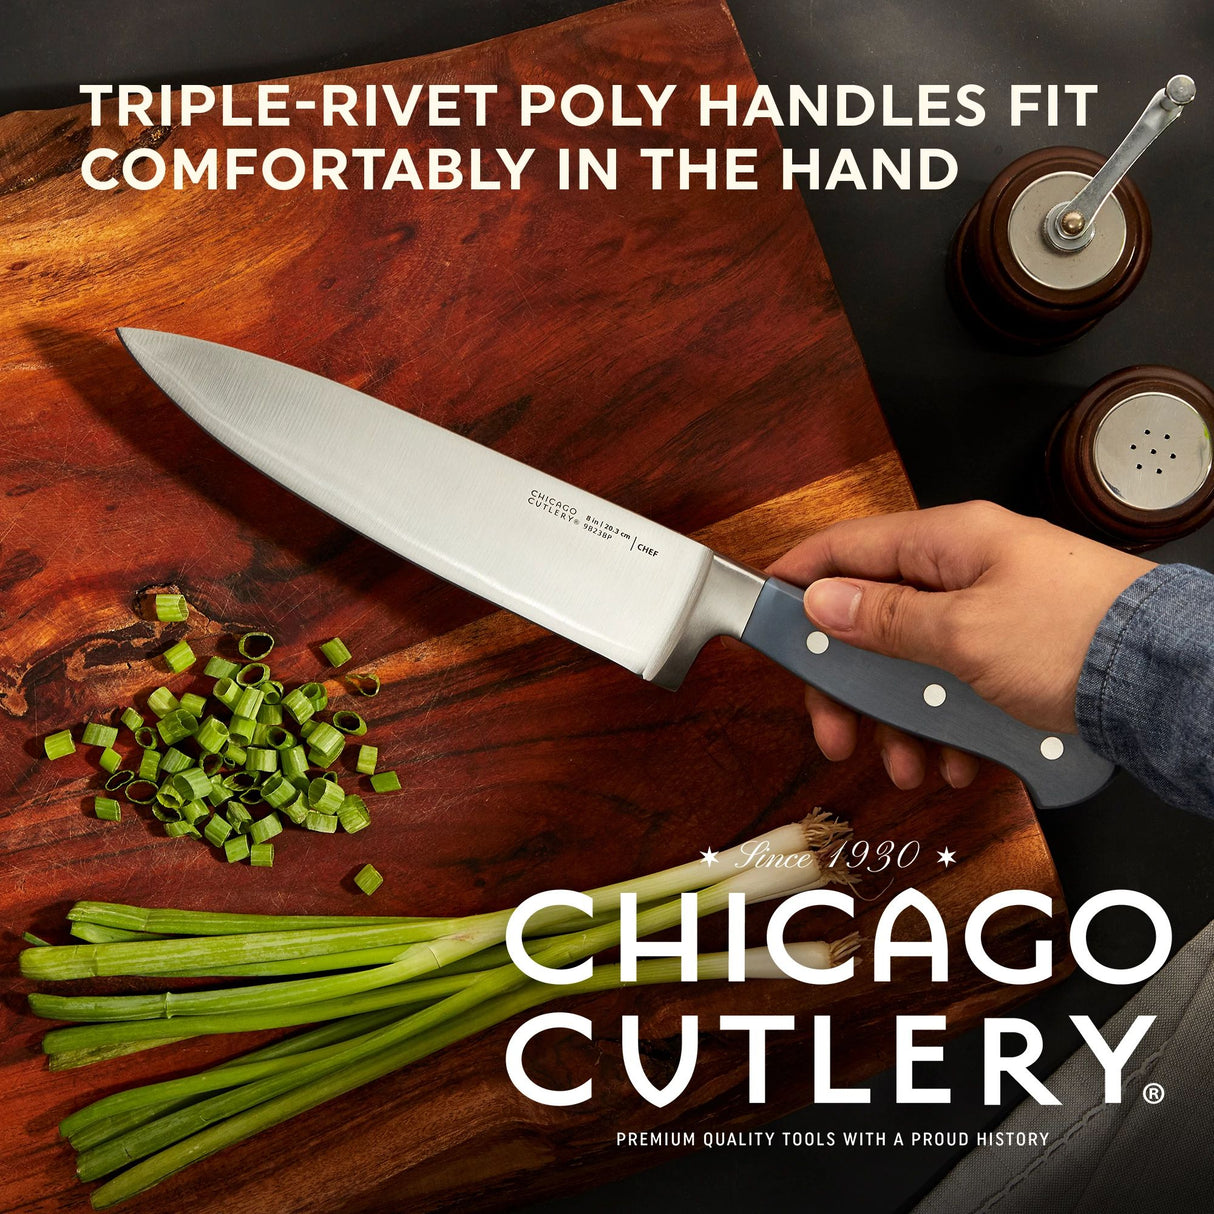  Halsted Chef knife with text triple-rivet poly handles fit comfortably in the hand